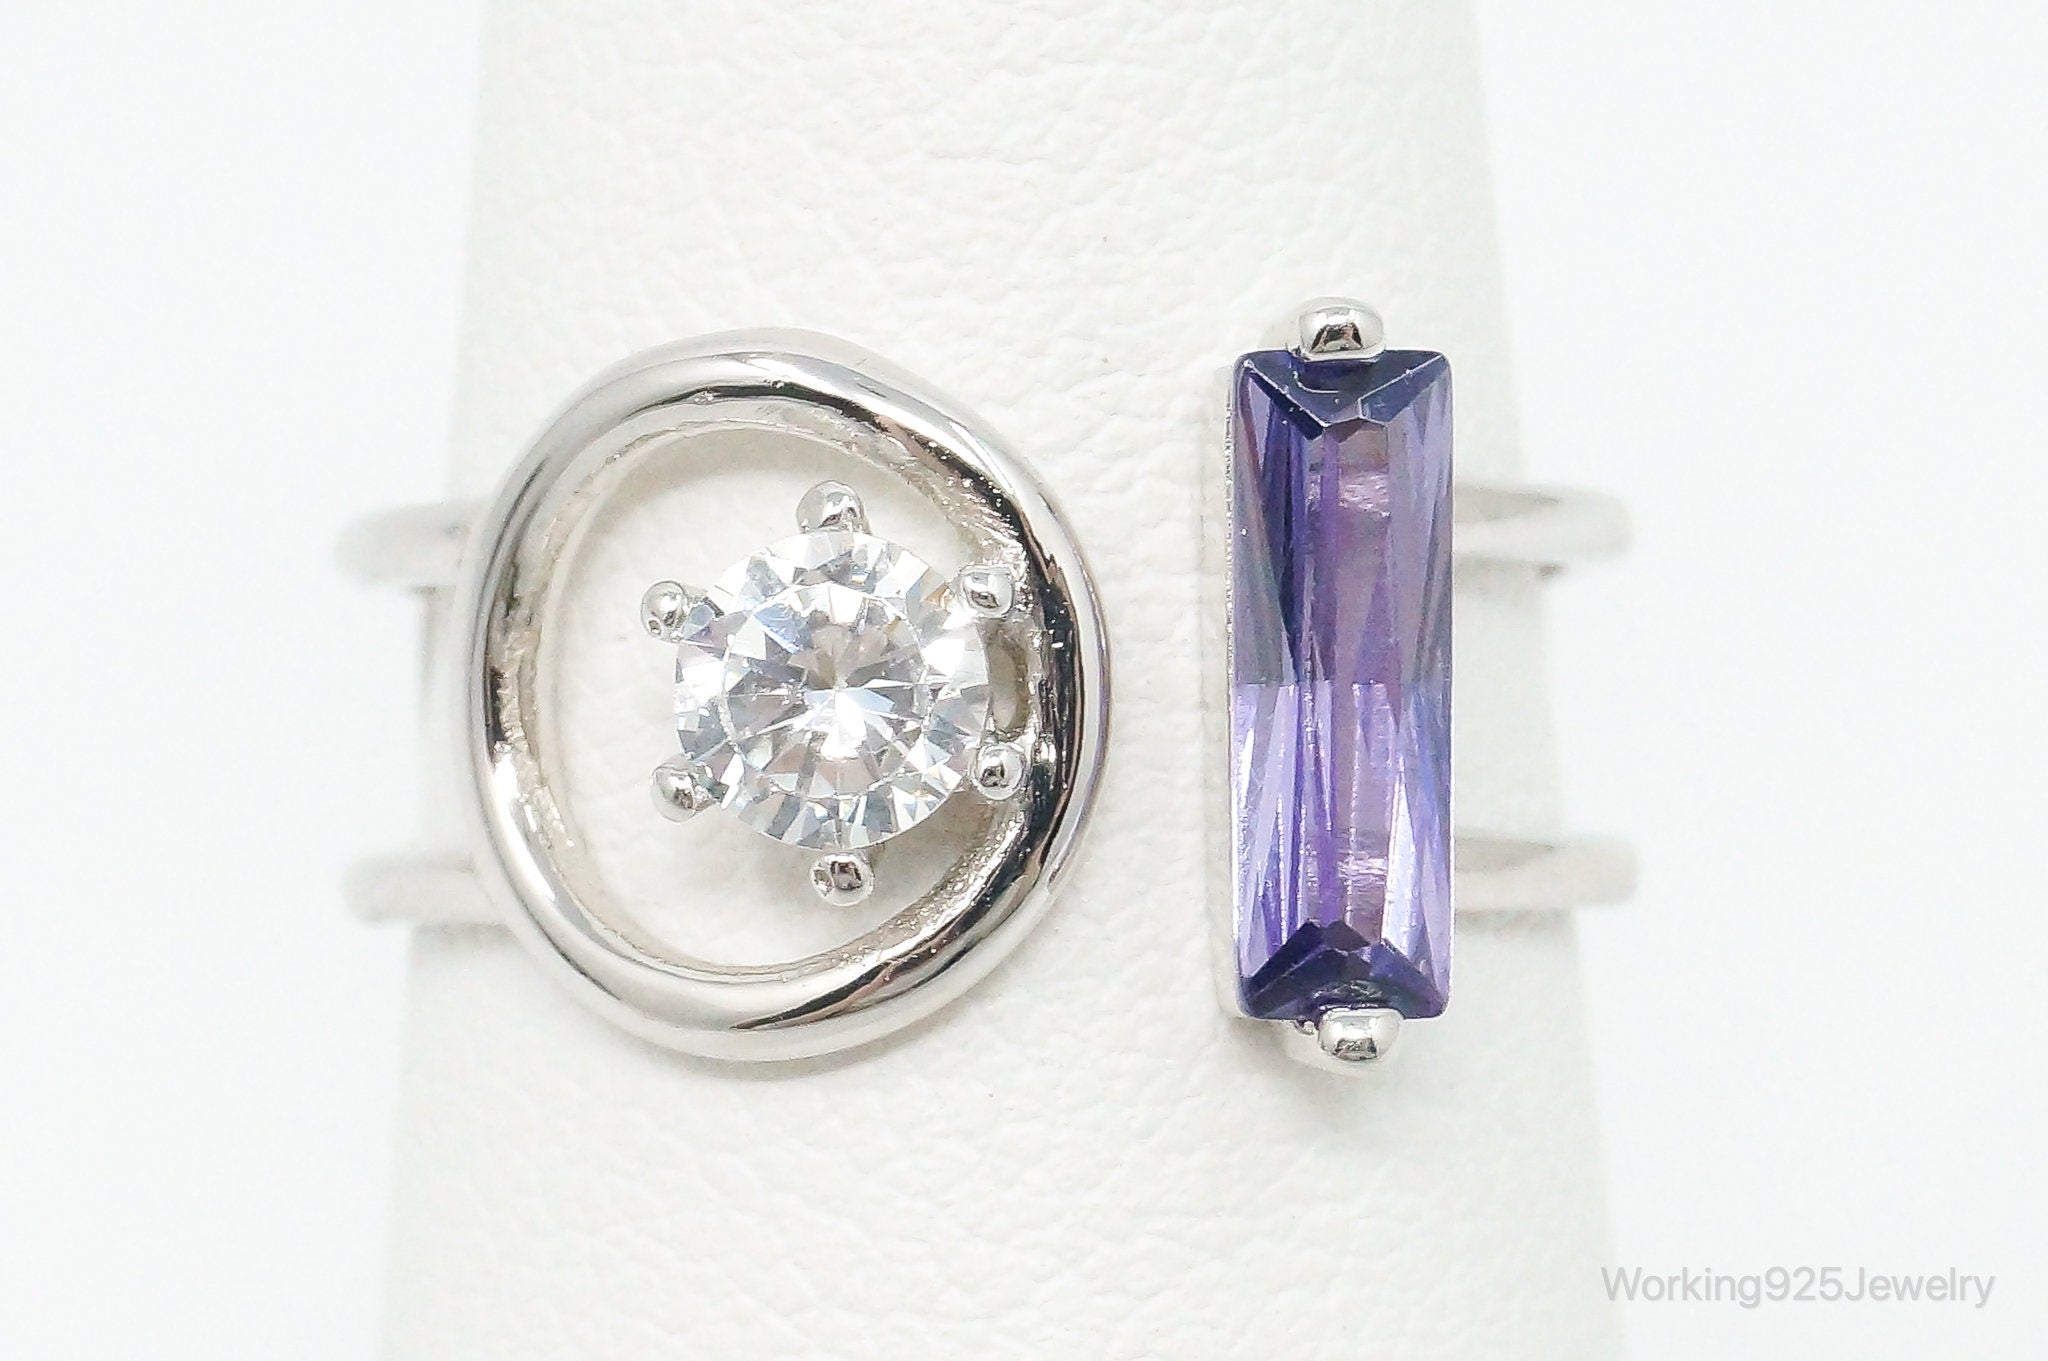 Amethyst Cubic Zirconia Sterling Silver Ring - Size 6.5 Adjustable